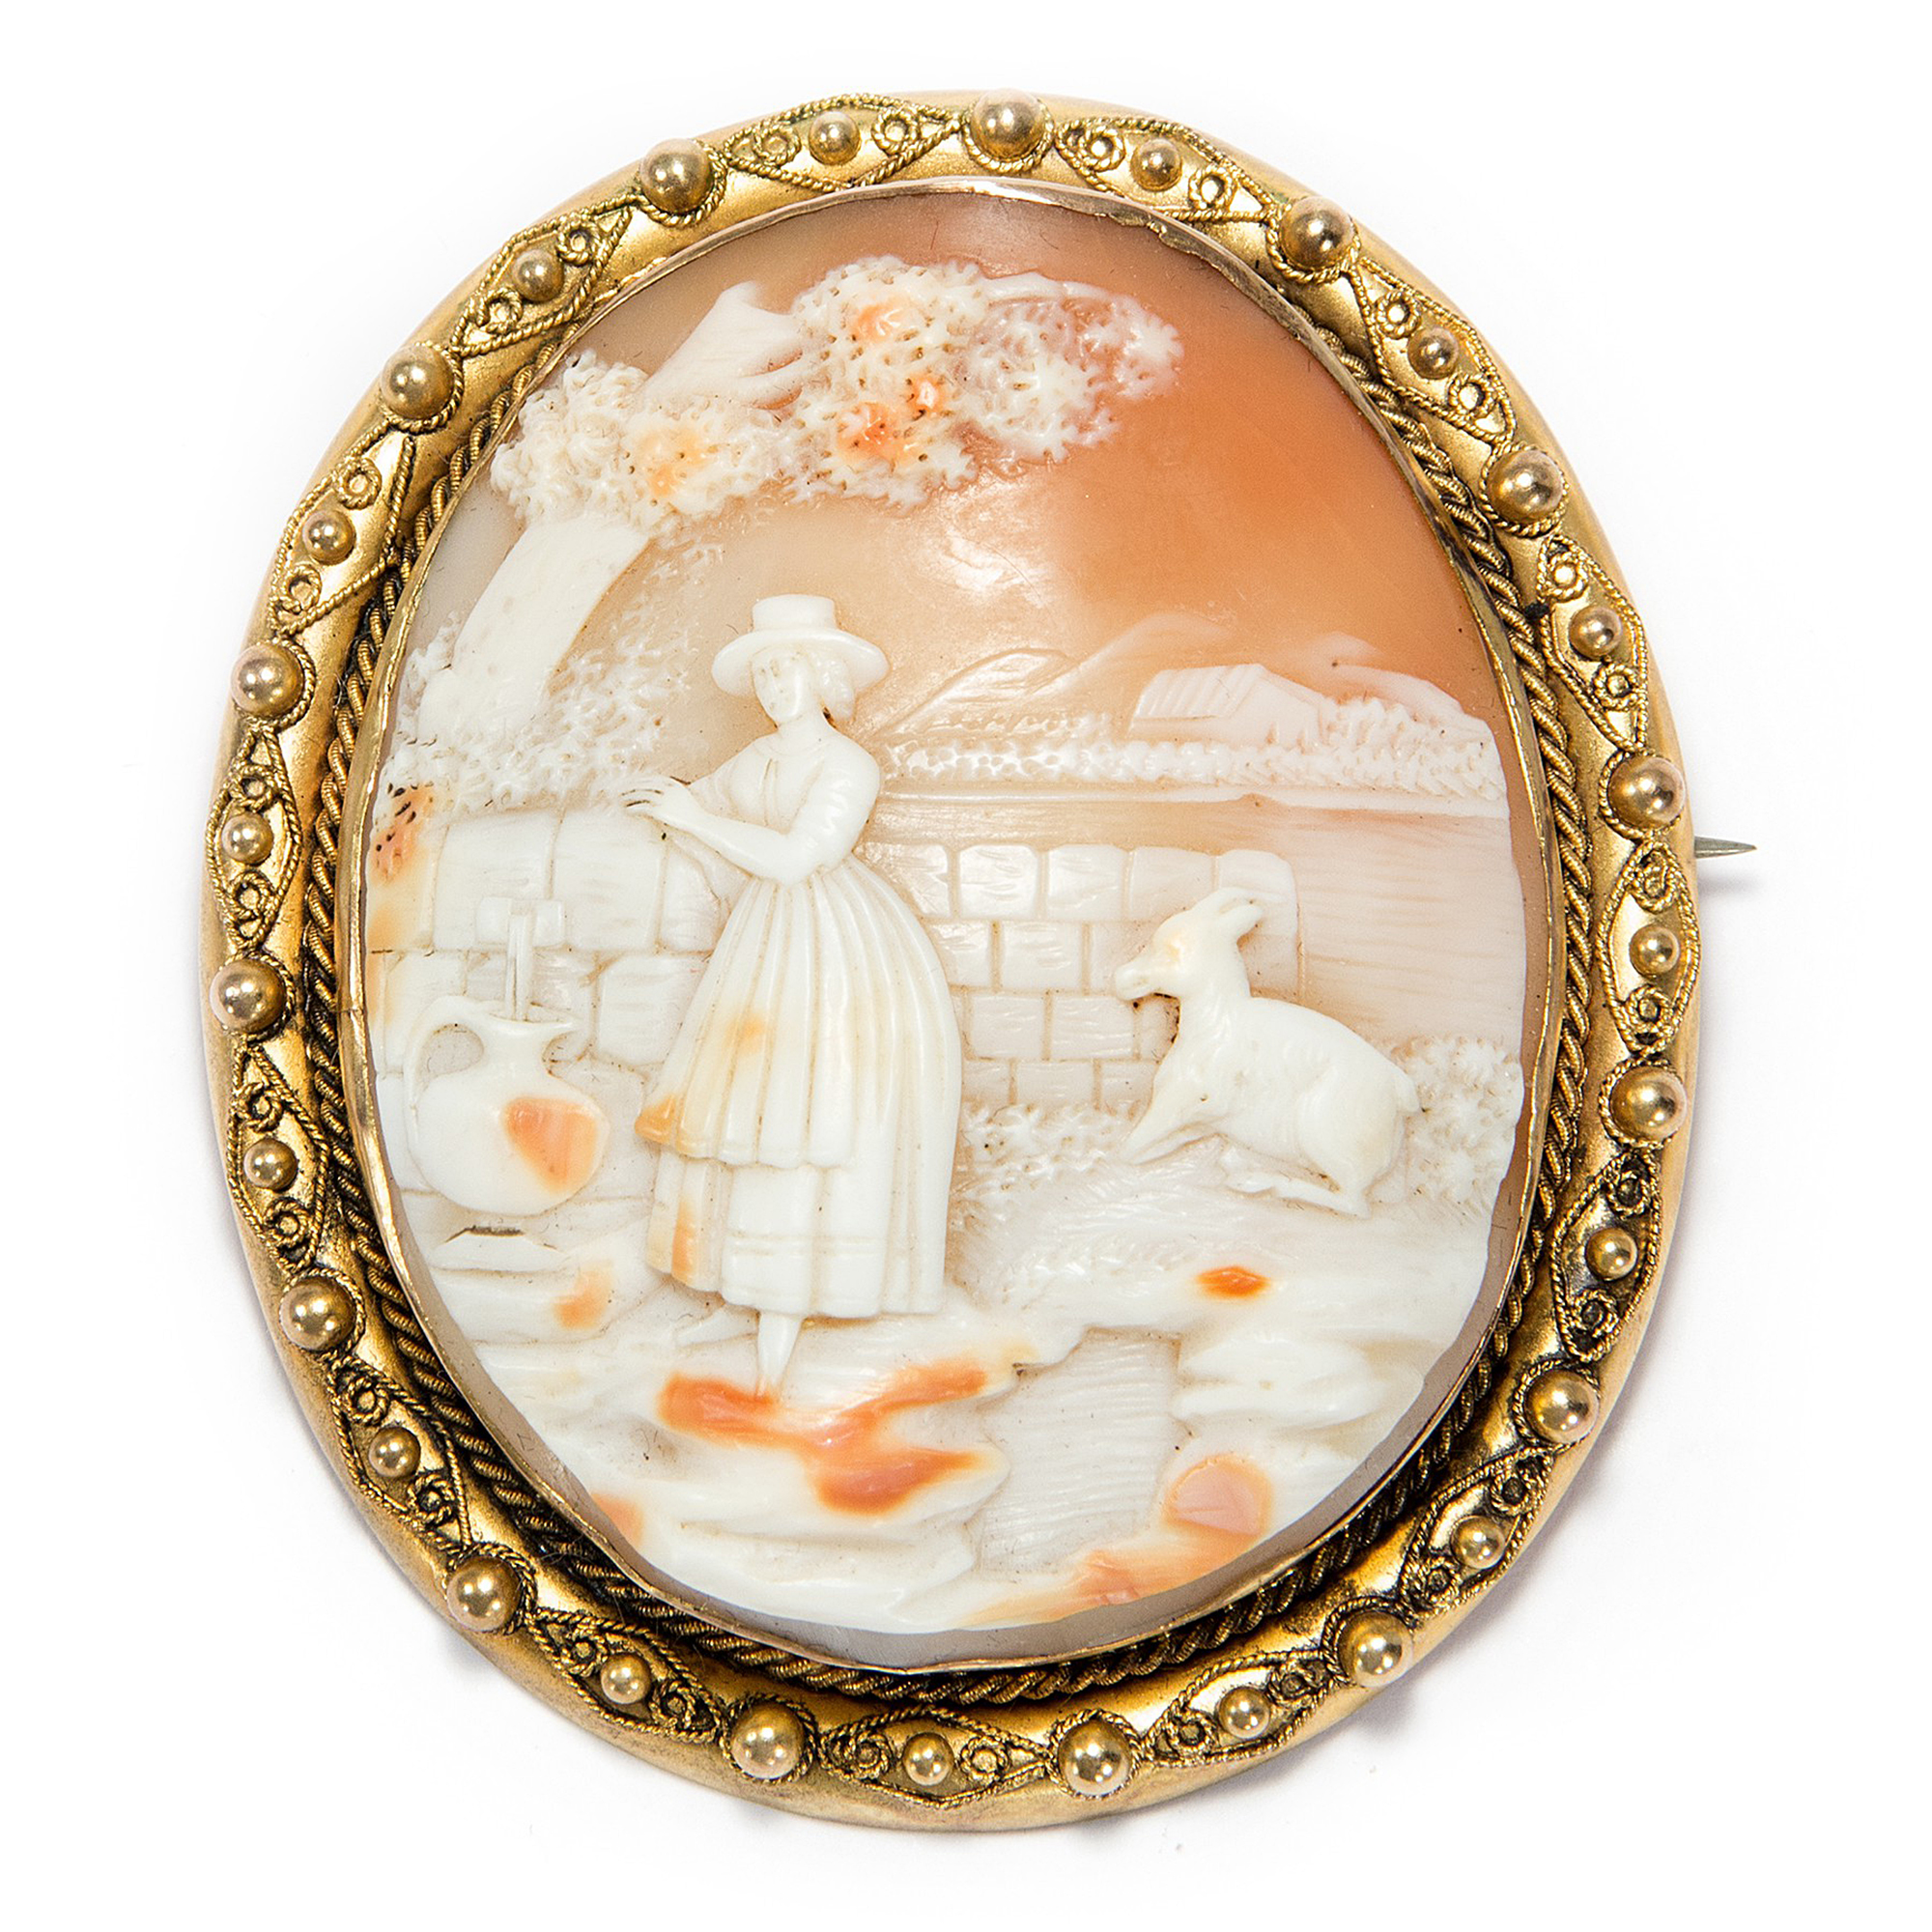 Shell cameo set in gold as brooch & pendant, France ca. 1850